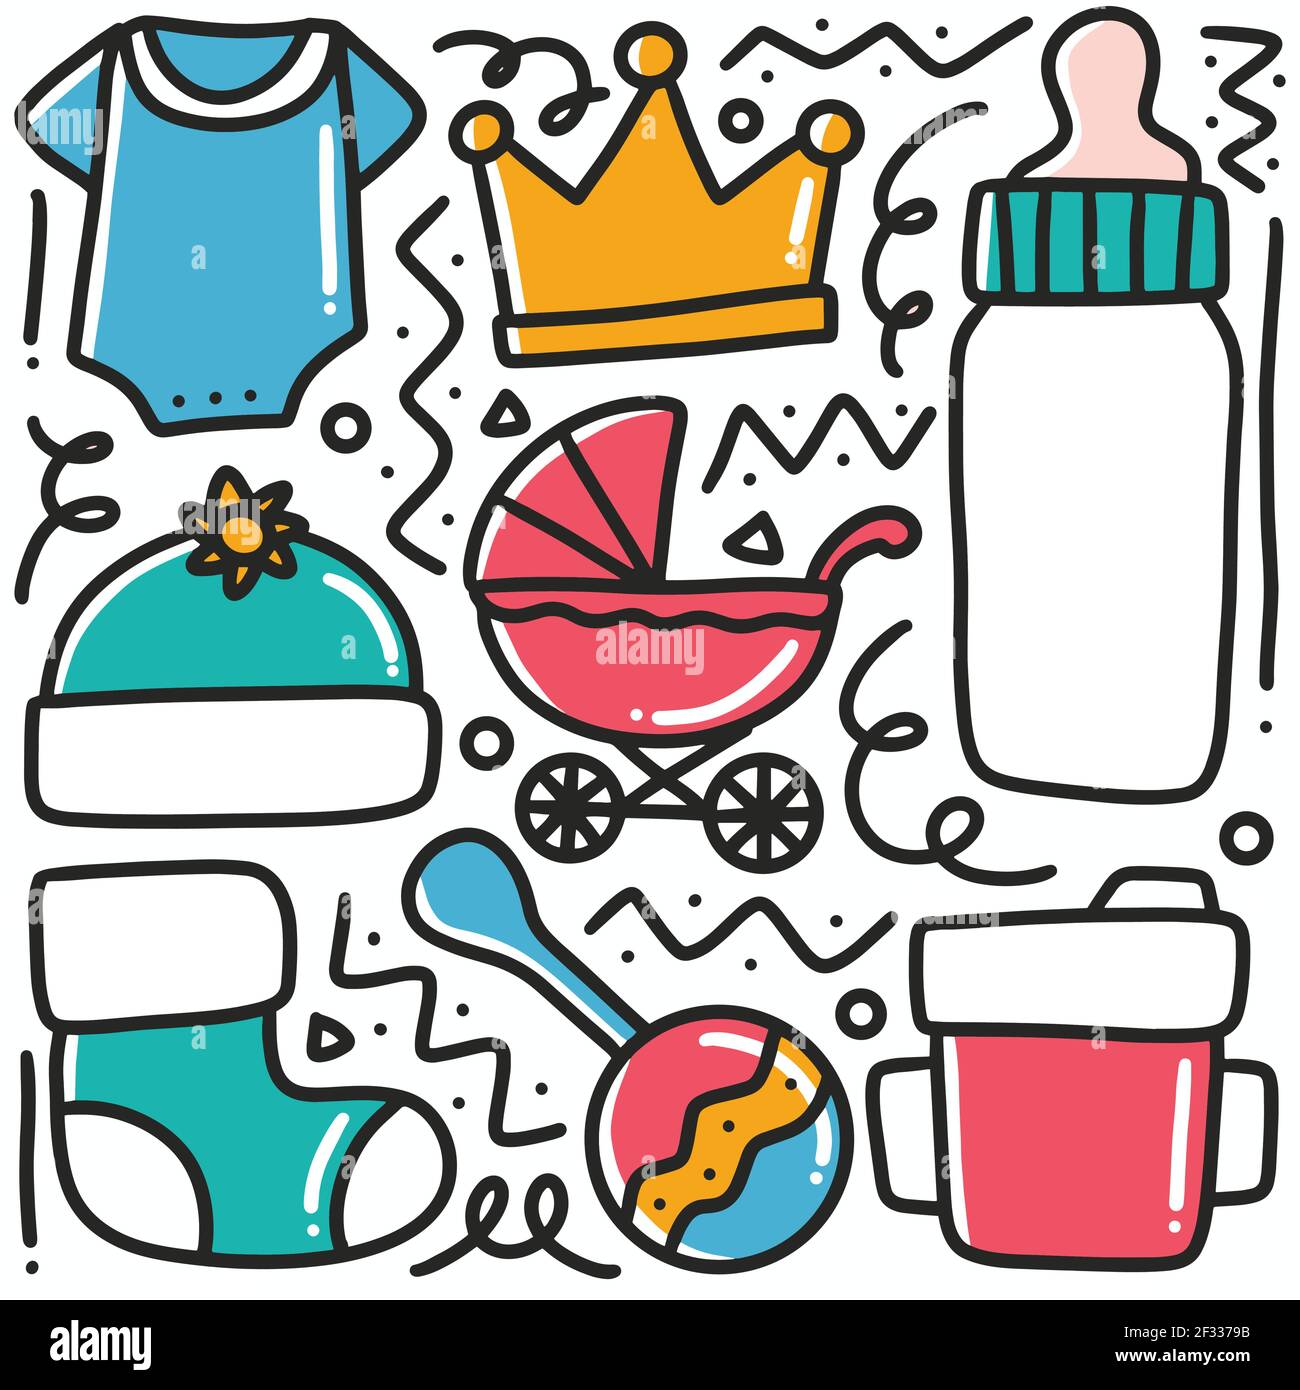 hand drawn baby stuff collection doodle set Stock Vector